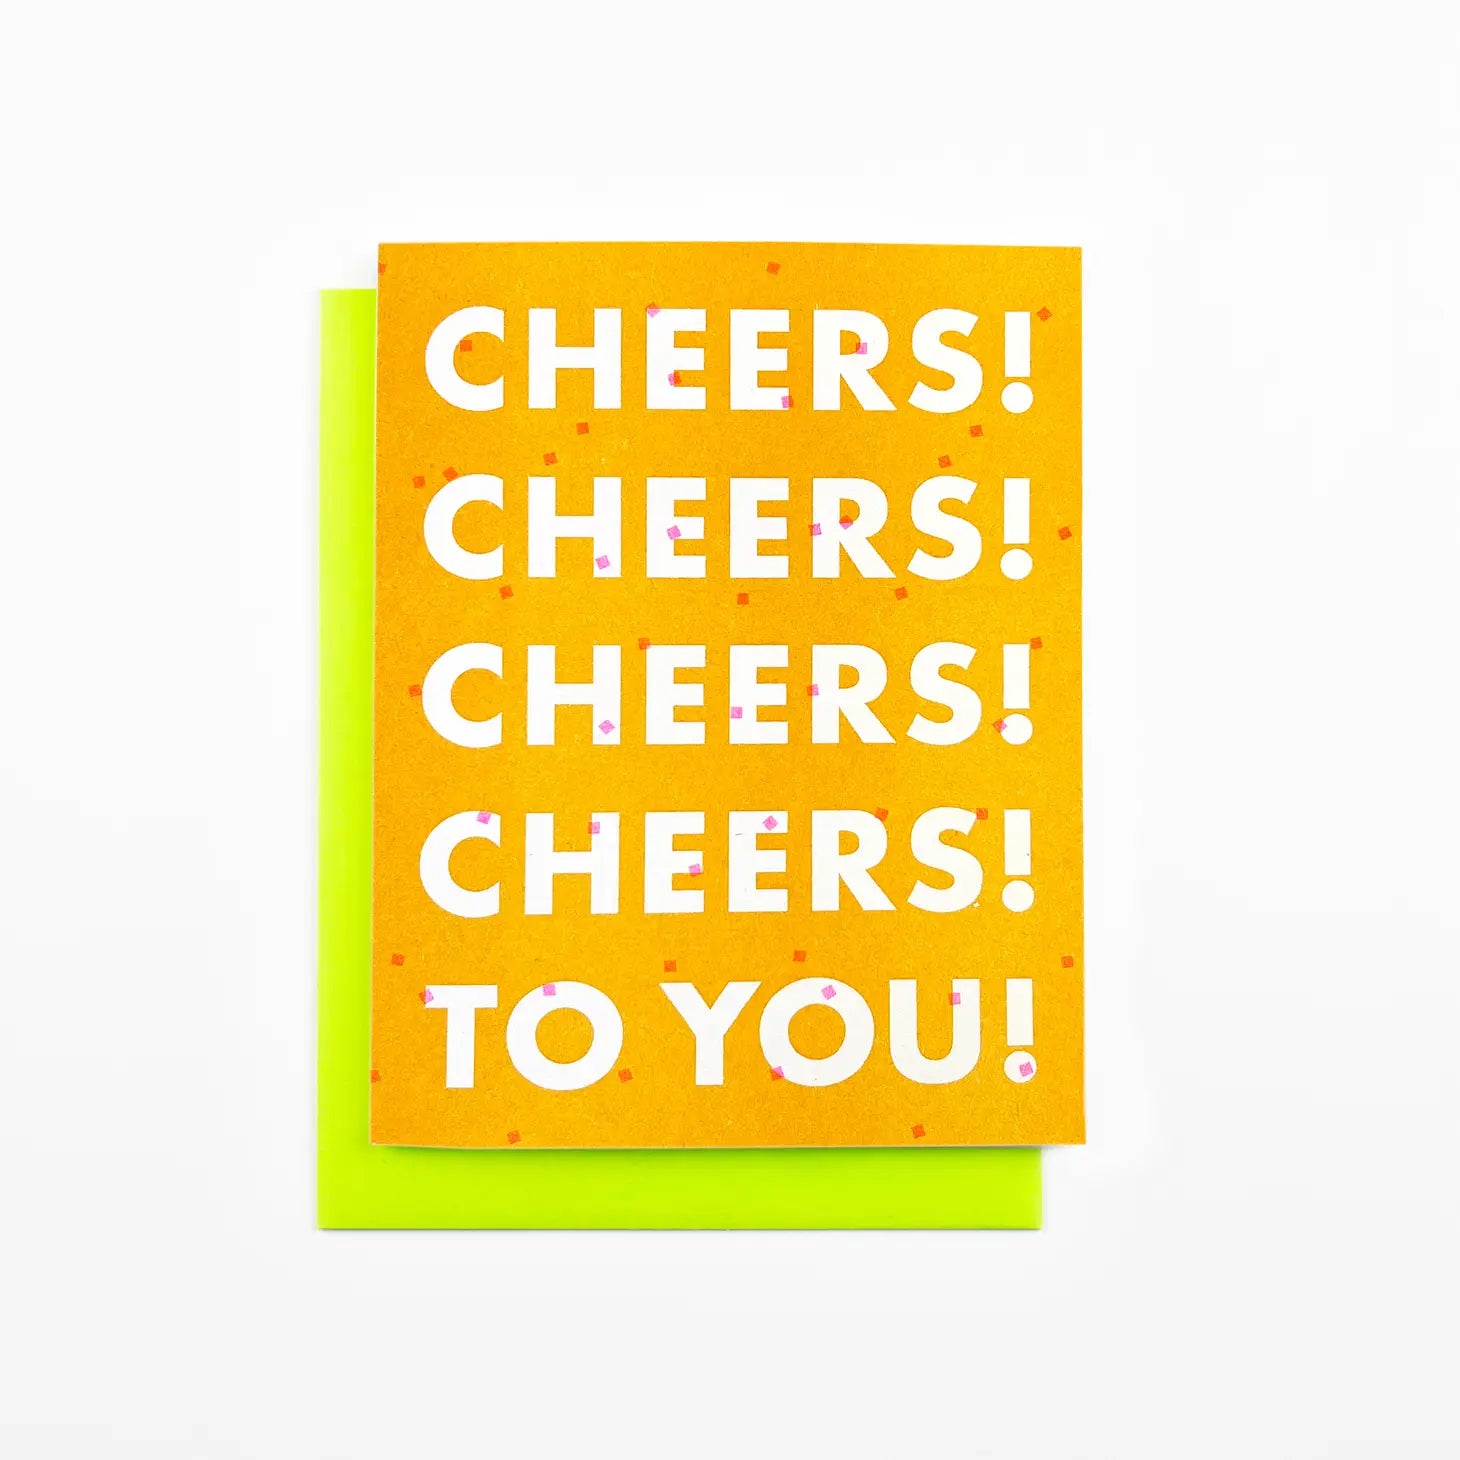 Orange card with pink dots. White text reads "cheers! cheers! cheers! cheers! to you!"